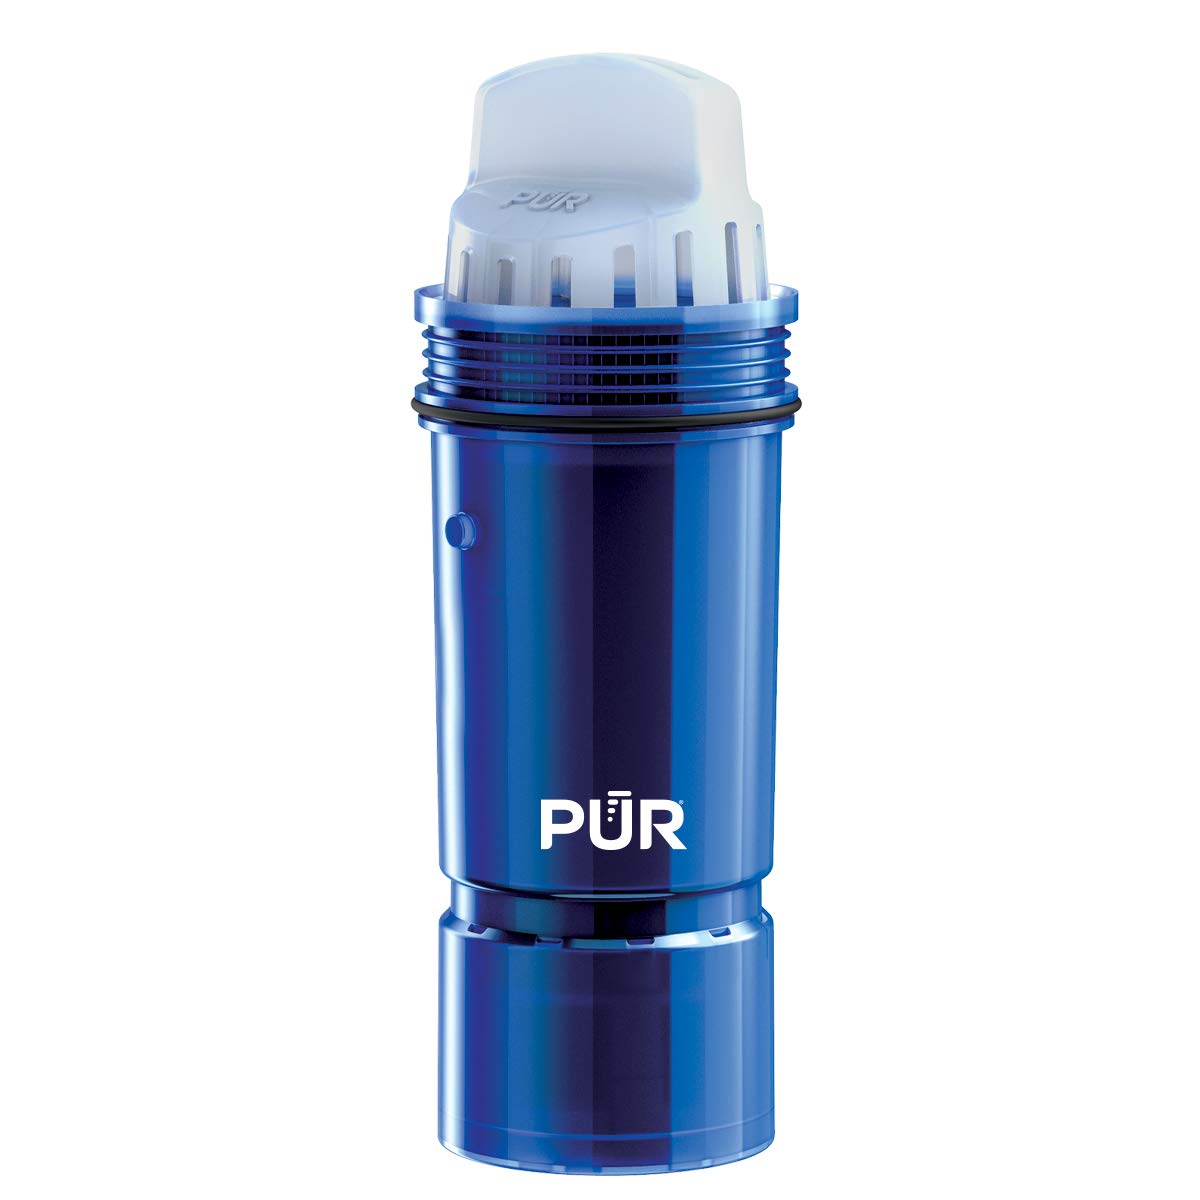 PUR Water Pitcher Dispenser Replacement Filter With Lead Reduction 1 